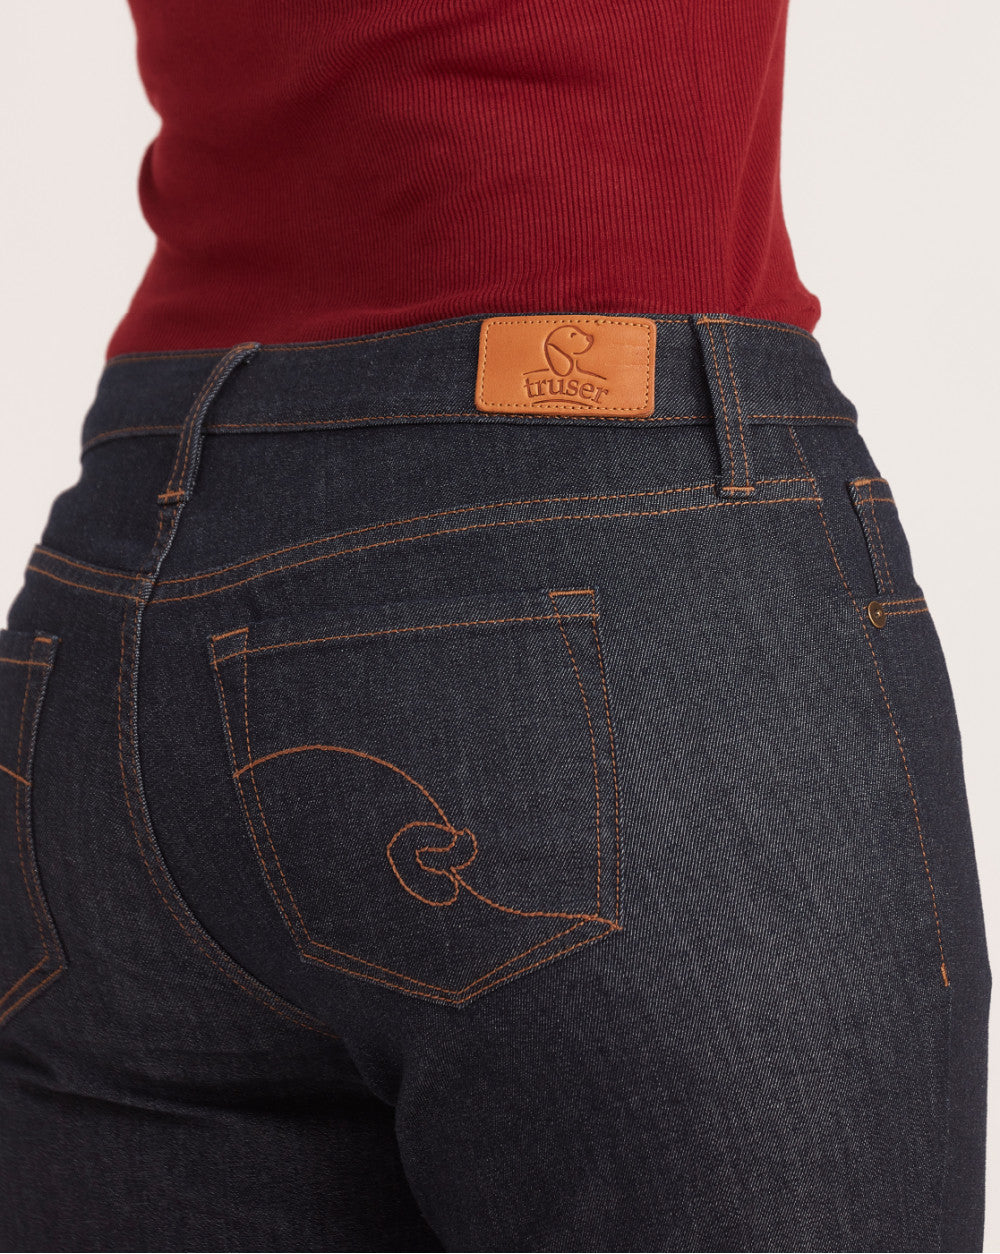 Straight Fit Waist Jeans - Natural Blue